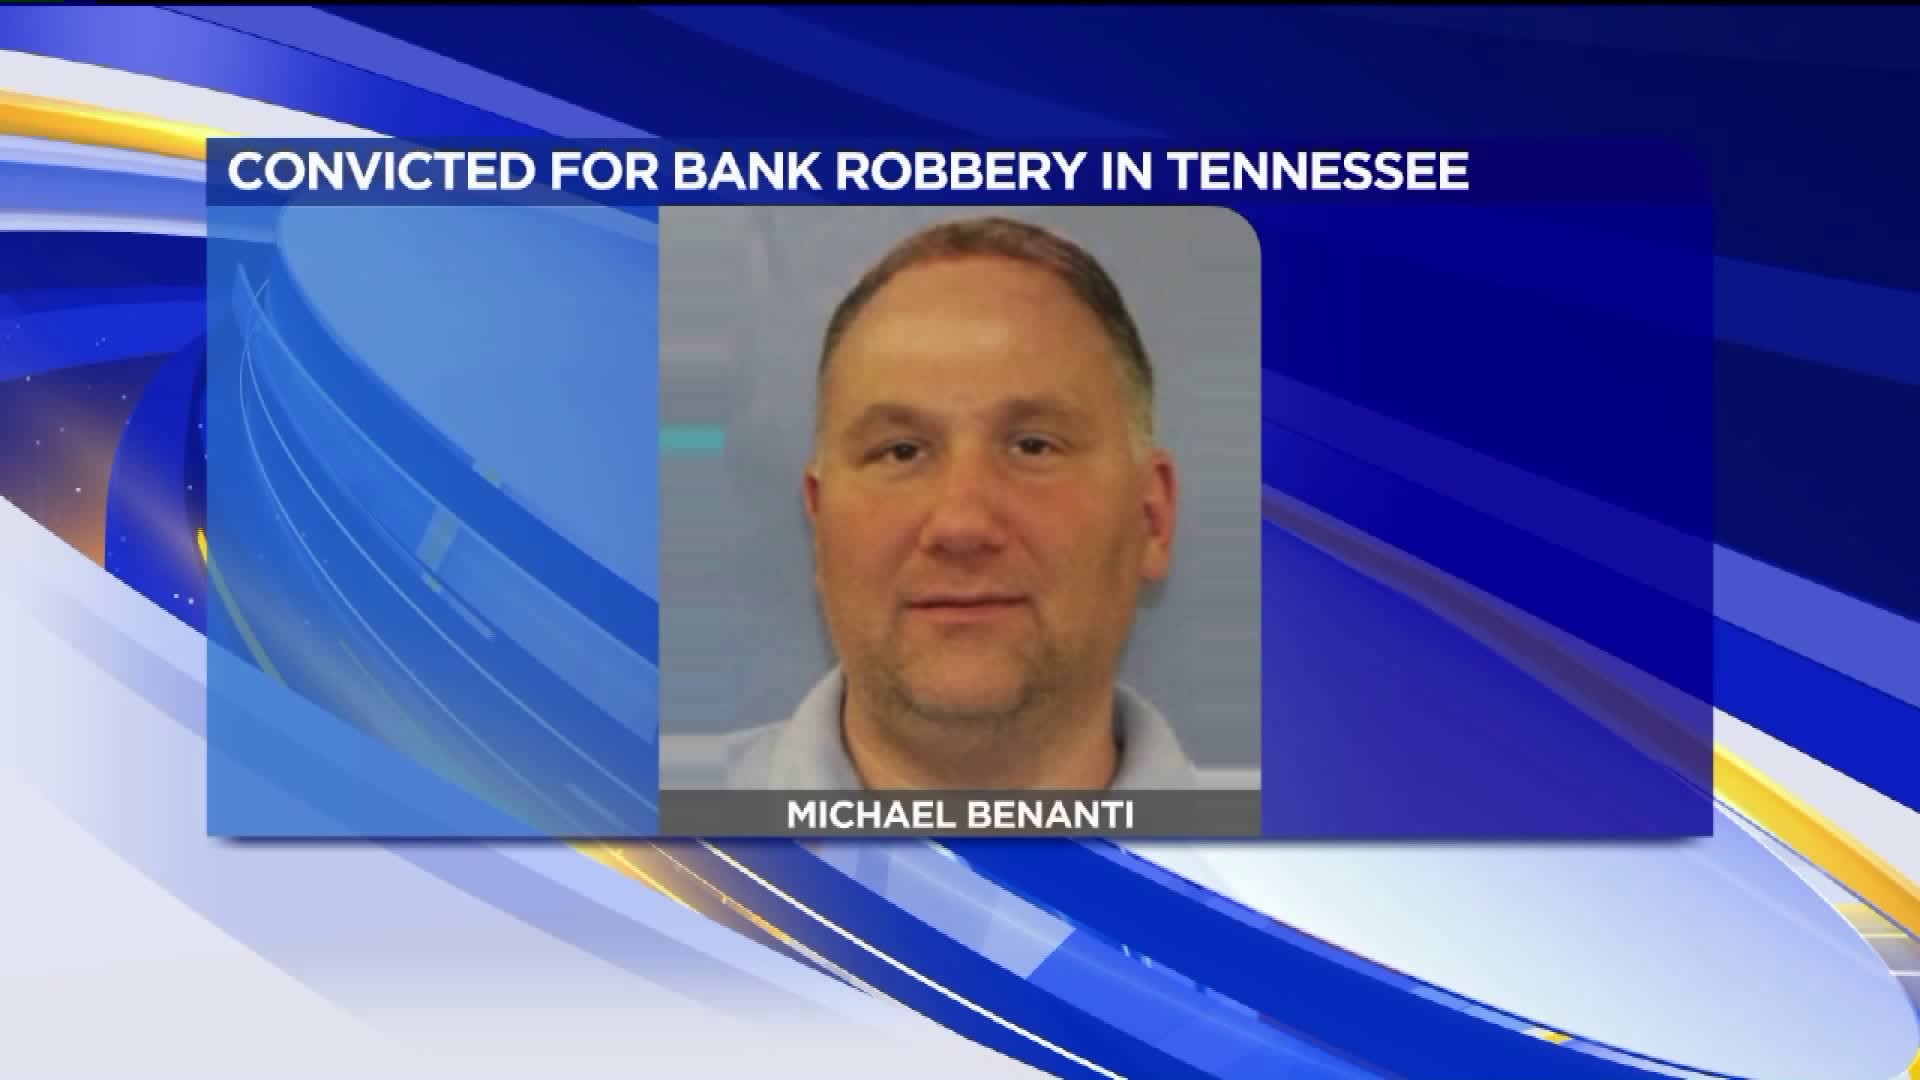 Convicted Bank Robber Sentenced to a Century